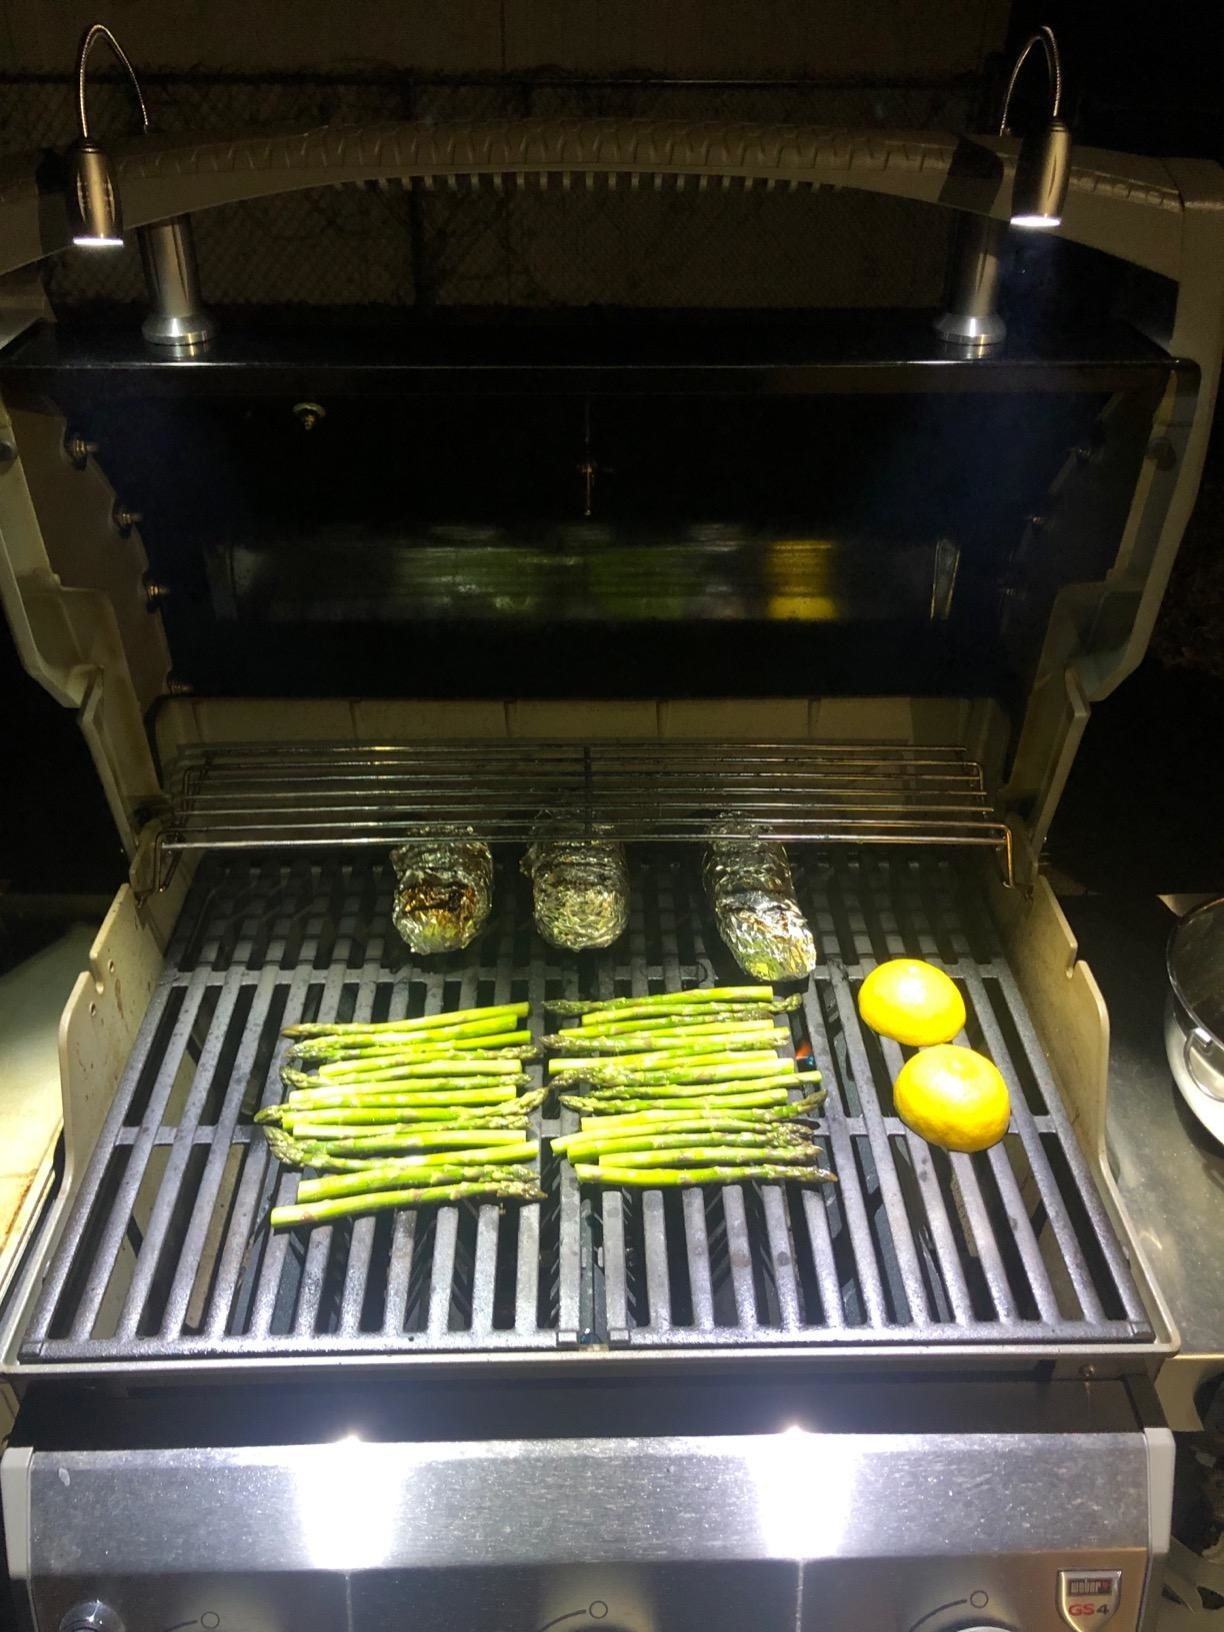 A barbecue with skewers and vegetables cooking, lit up by a pair of magnetic lights at night.